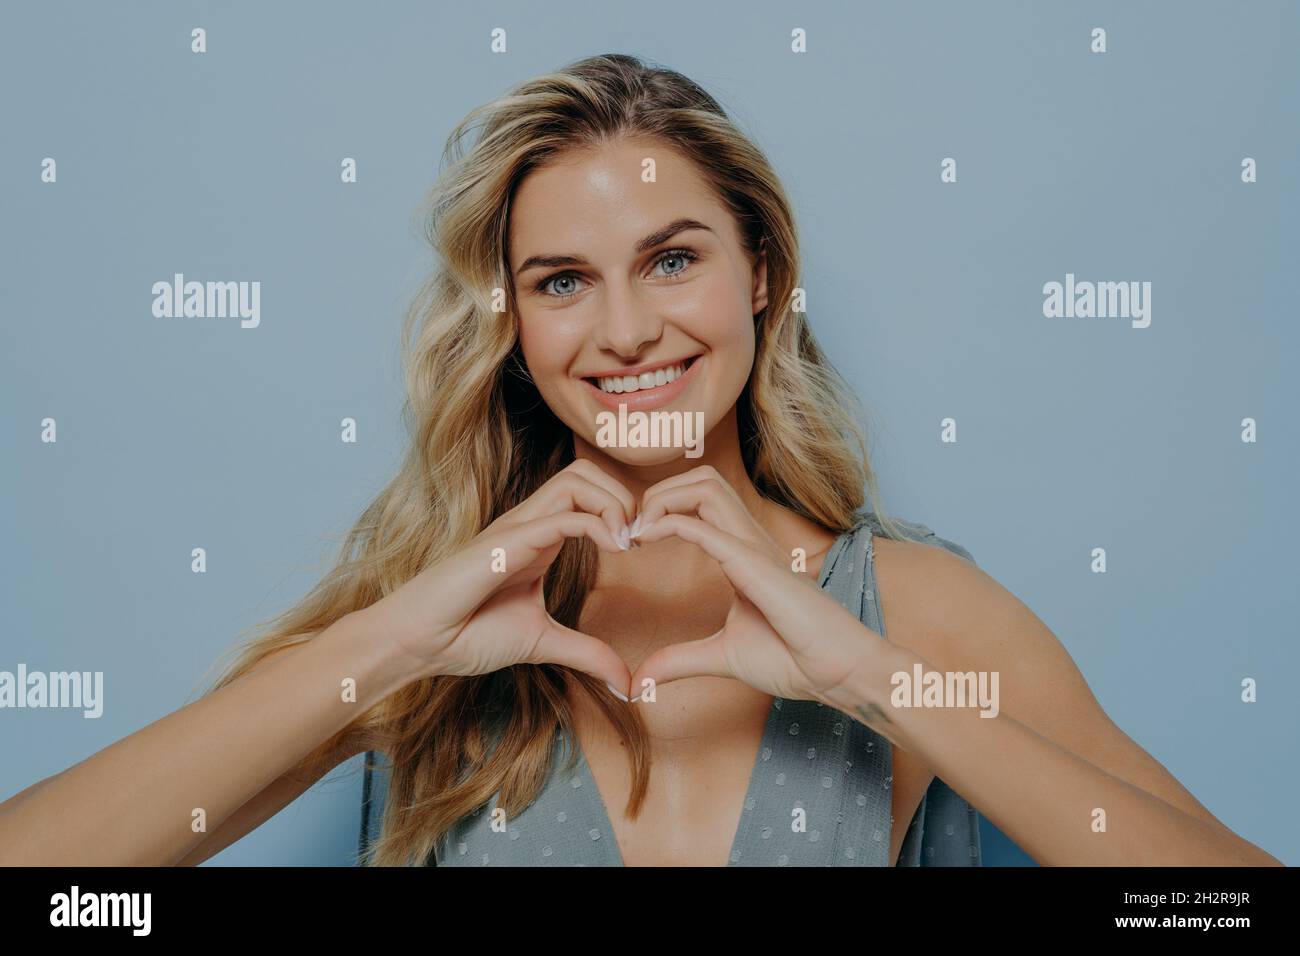 Lovely blonde woman admitting in her love with use of heart gesture Stock Photo